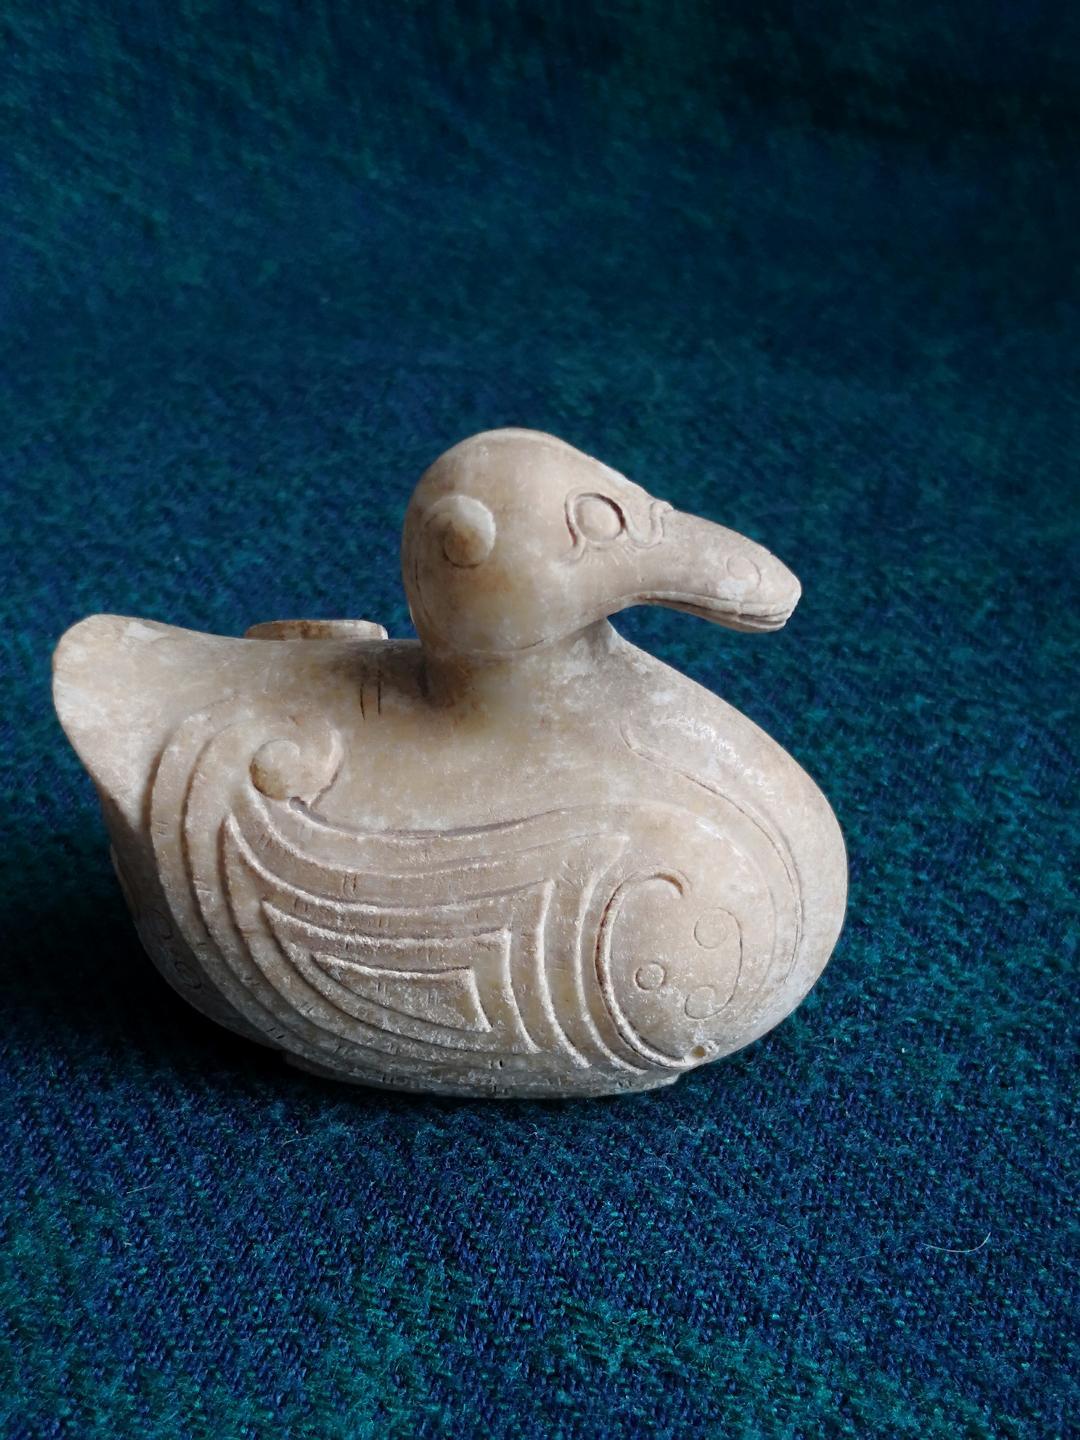 China, a finely carved early jade of a mandarin duck- a significant jade ornament with a light brown calcified color and patina from hundreds of years of age. Song dynasty, 13th century. 

Lovely details. 

Quality: Fine condition